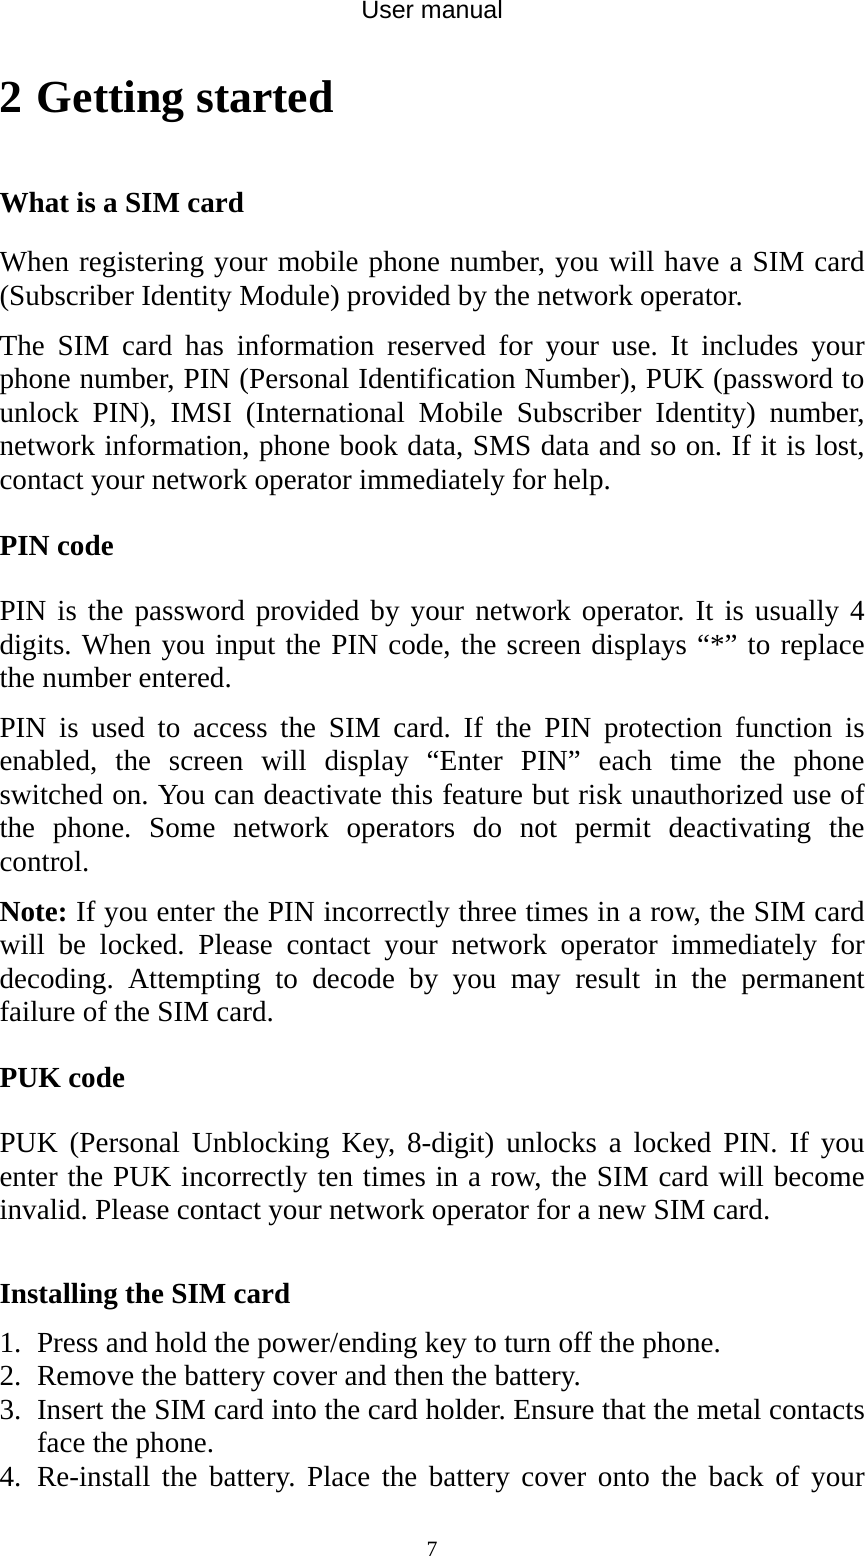 User manual  72 Getting started What is a SIM card When registering your mobile phone number, you will have a SIM card (Subscriber Identity Module) provided by the network operator.   The SIM card has information reserved for your use. It includes your phone number, PIN (Personal Identification Number), PUK (password to unlock PIN), IMSI (International Mobile Subscriber Identity) number, network information, phone book data, SMS data and so on. If it is lost, contact your network operator immediately for help. PIN code PIN is the password provided by your network operator. It is usually 4 digits. When you input the PIN code, the screen displays “*” to replace the number entered. PIN is used to access the SIM card. If the PIN protection function is enabled, the screen will display “Enter PIN” each time the phone switched on. You can deactivate this feature but risk unauthorized use of the phone. Some network operators do not permit deactivating the control. Note: If you enter the PIN incorrectly three times in a row, the SIM card will be locked. Please contact your network operator immediately for decoding. Attempting to decode by you may result in the permanent failure of the SIM card. PUK code PUK (Personal Unblocking Key, 8-digit) unlocks a locked PIN. If you enter the PUK incorrectly ten times in a row, the SIM card will become invalid. Please contact your network operator for a new SIM card.  Installing the SIM card 1. Press and hold the power/ending key to turn off the phone. 2. Remove the battery cover and then the battery. 3. Insert the SIM card into the card holder. Ensure that the metal contacts face the phone. 4. Re-install the battery. Place the battery cover onto the back of your 